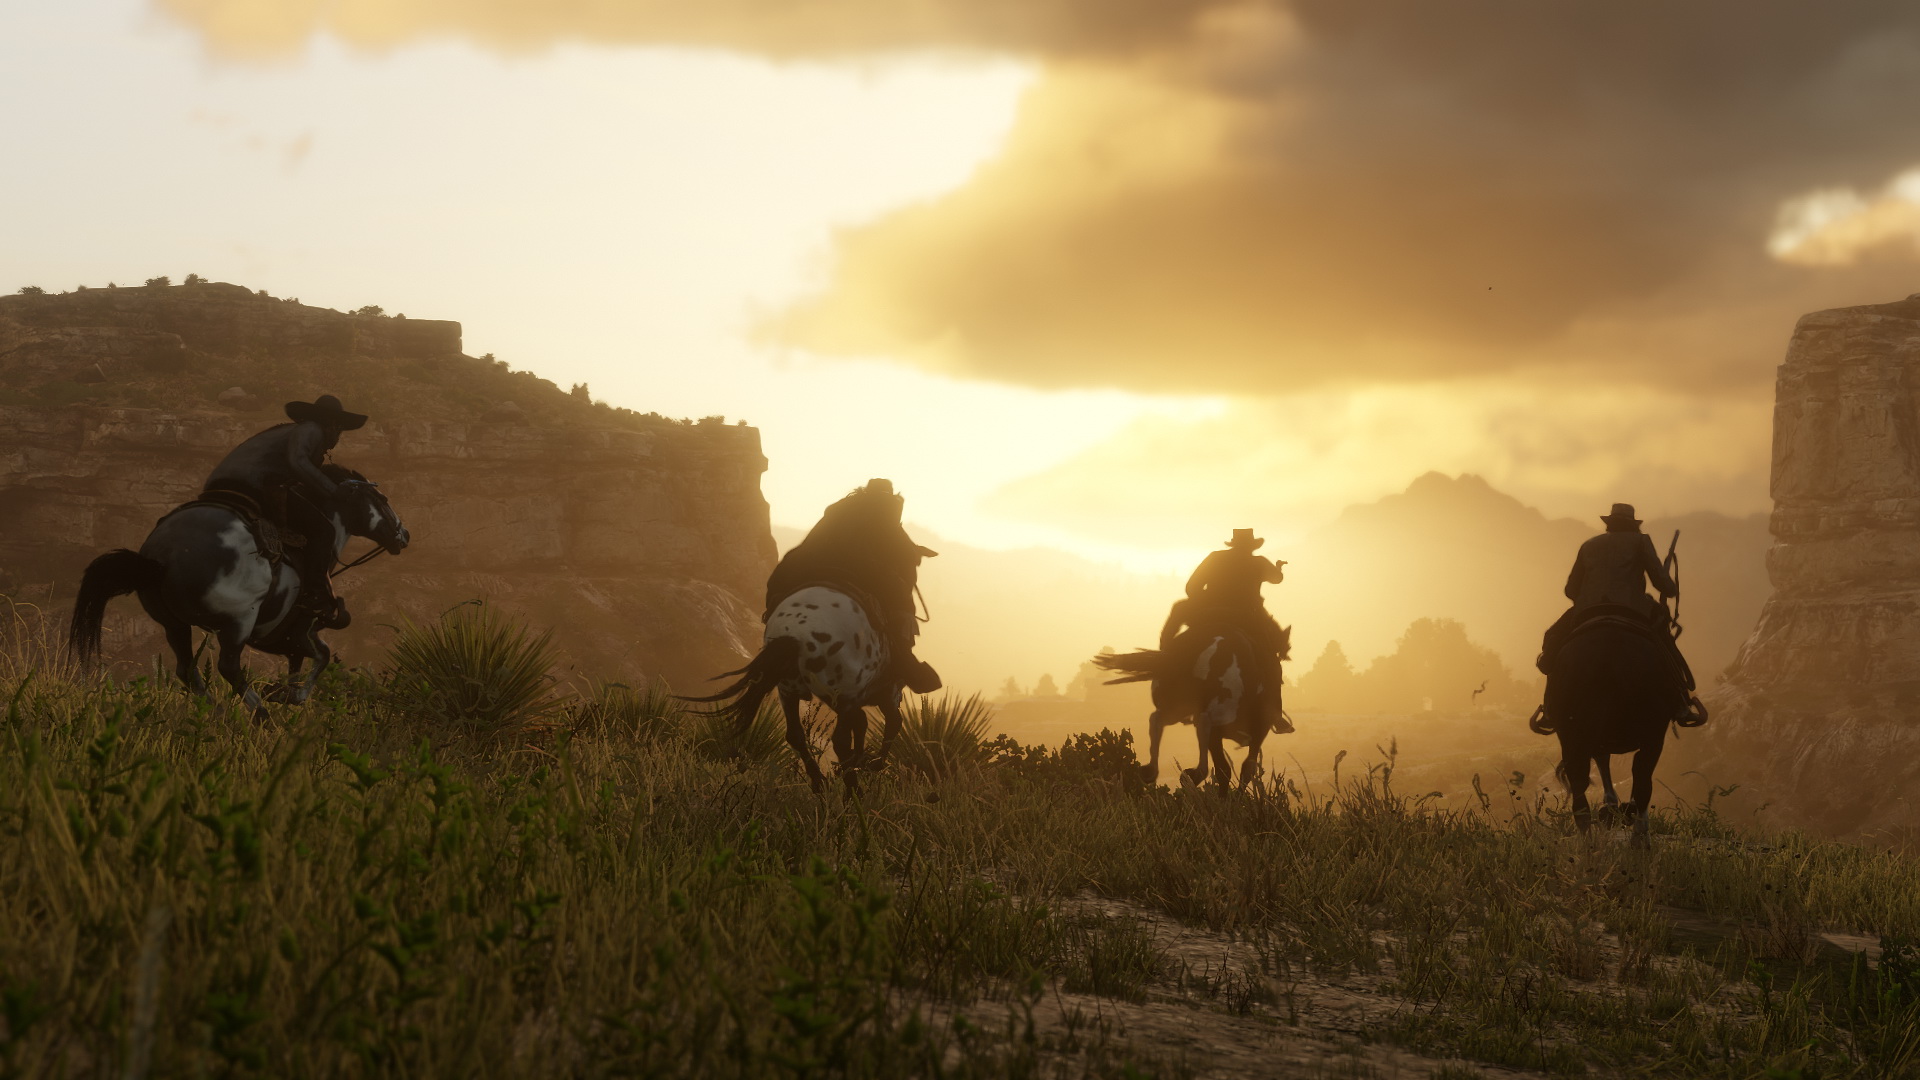 Red Dead Redemption 2 on PS5: Is there a release date for PlayStation 5  version yet?